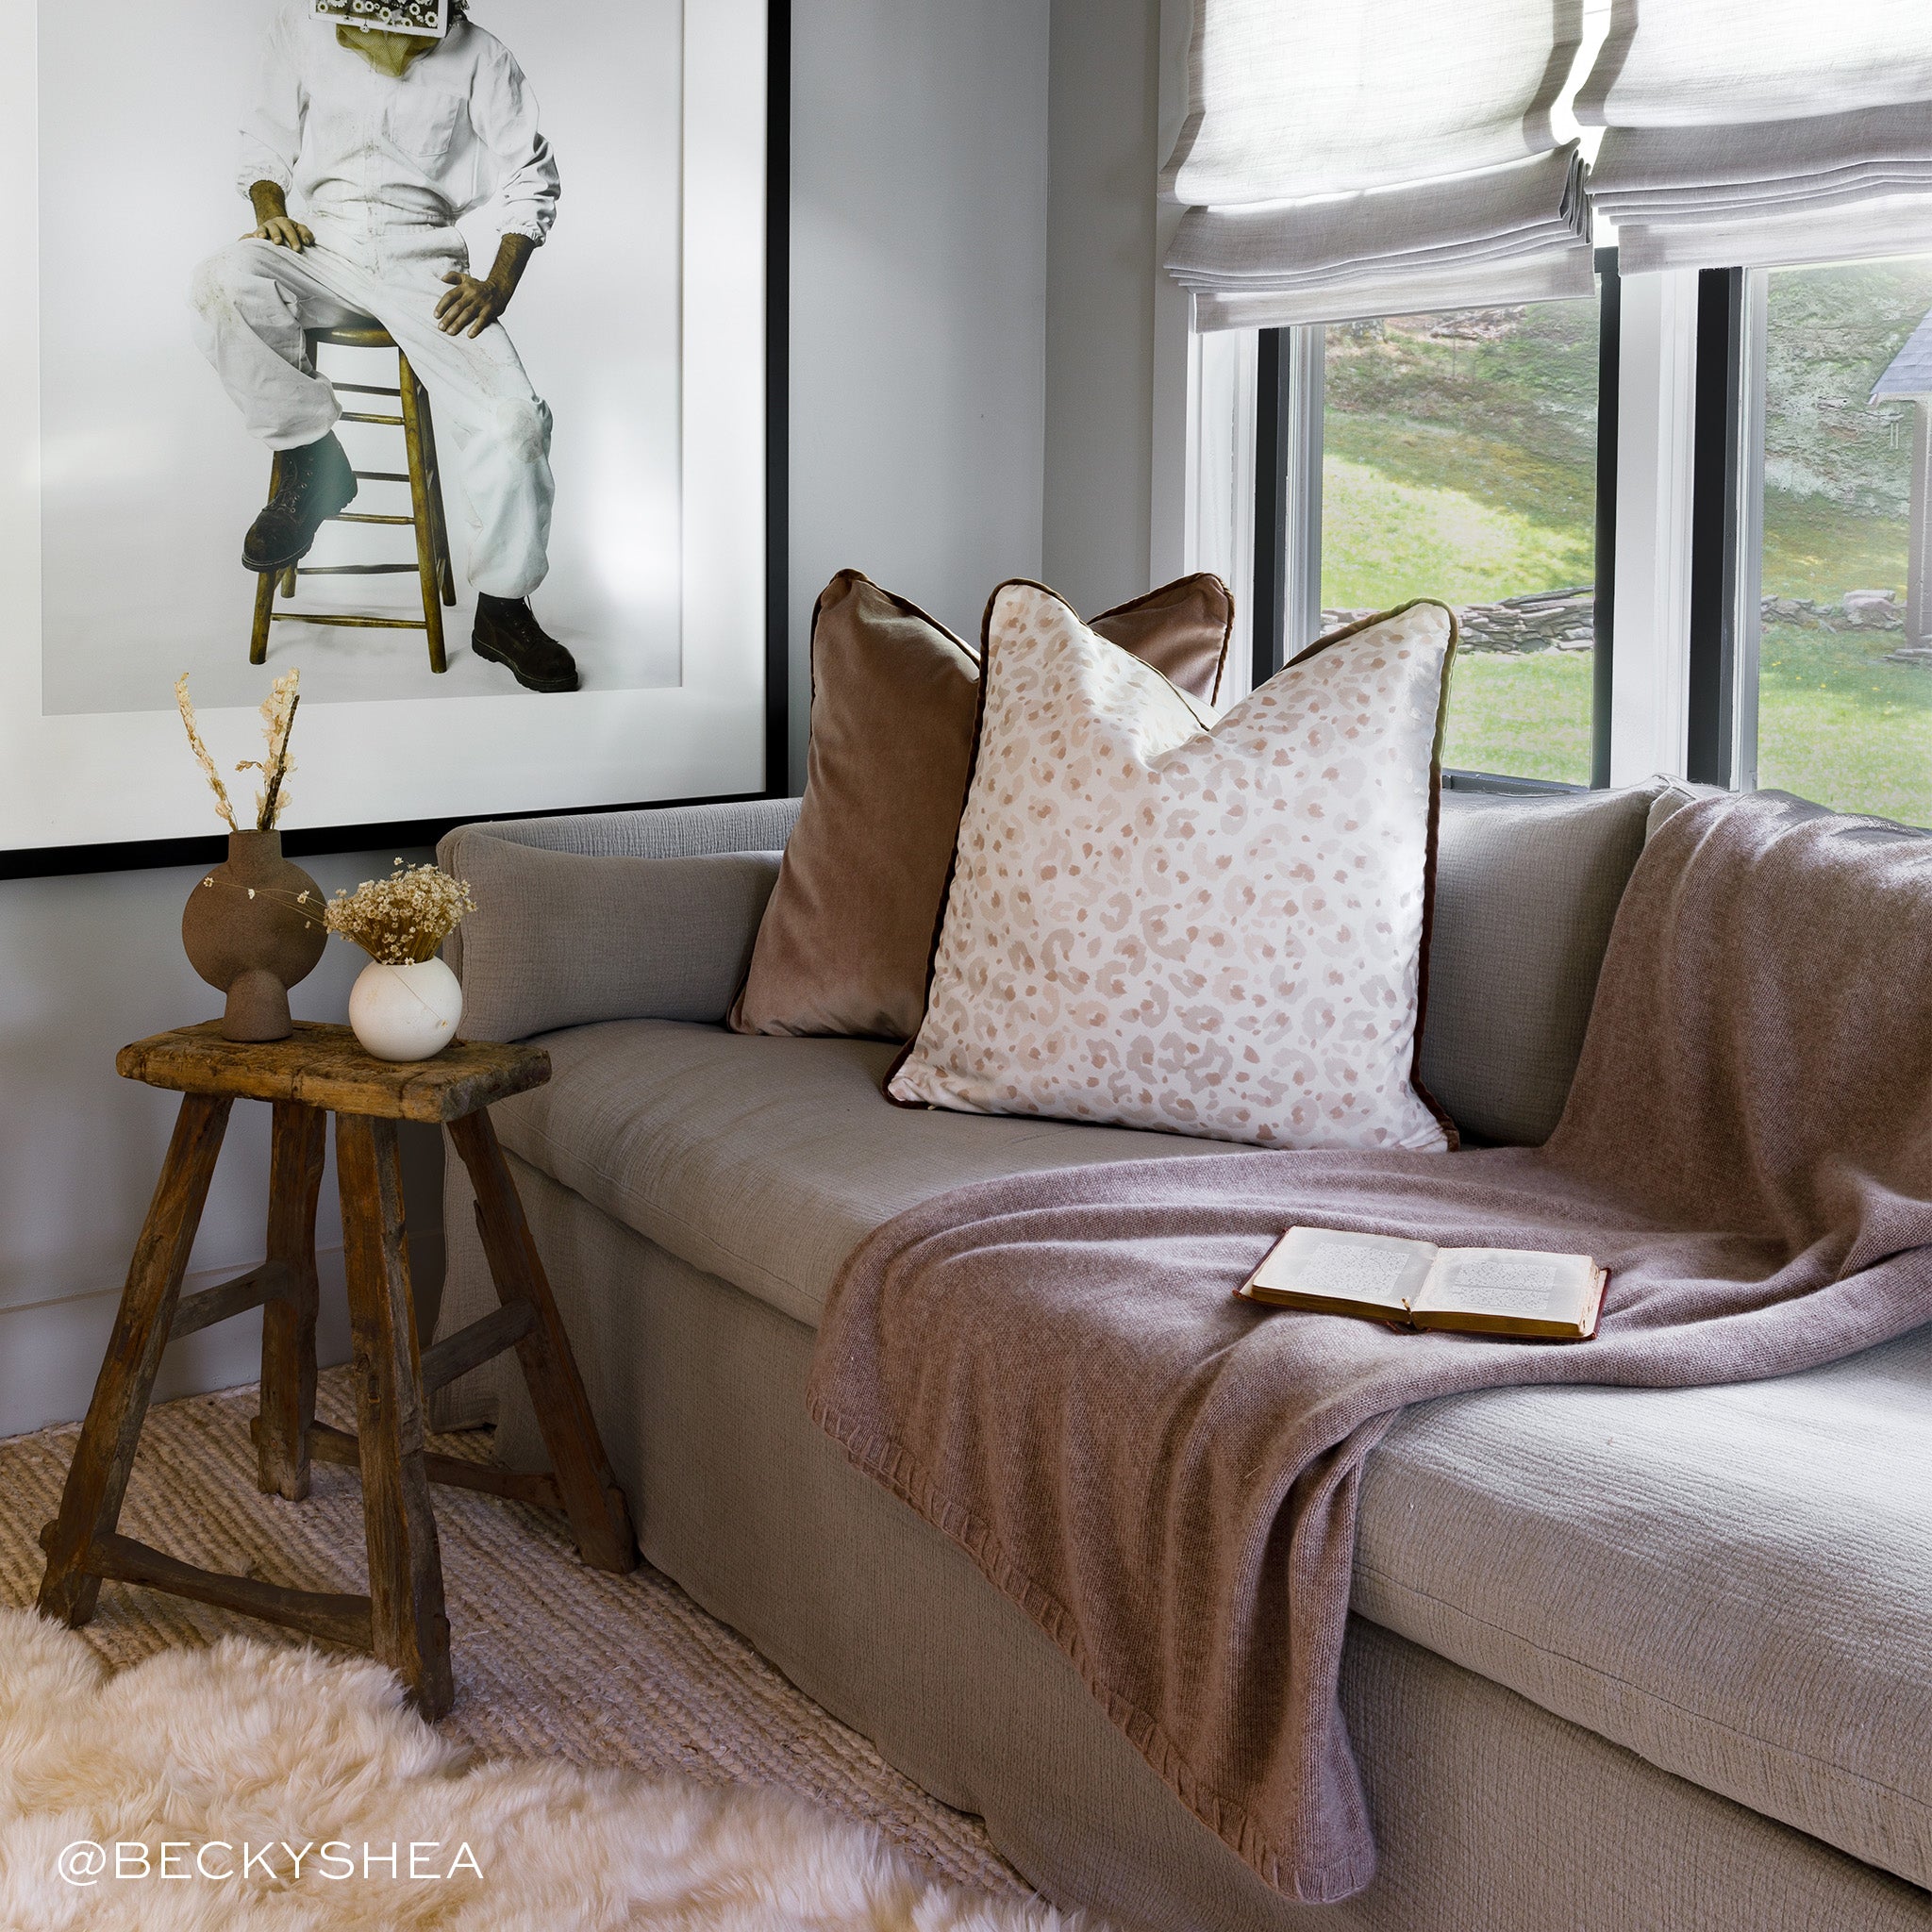 Room corner styled with brown velvet pillow and Beige Animal Print Pillow on brown couch next to wooden stool with two vases on top and framed artwork hung on wall. Photo taken by Becky Shea